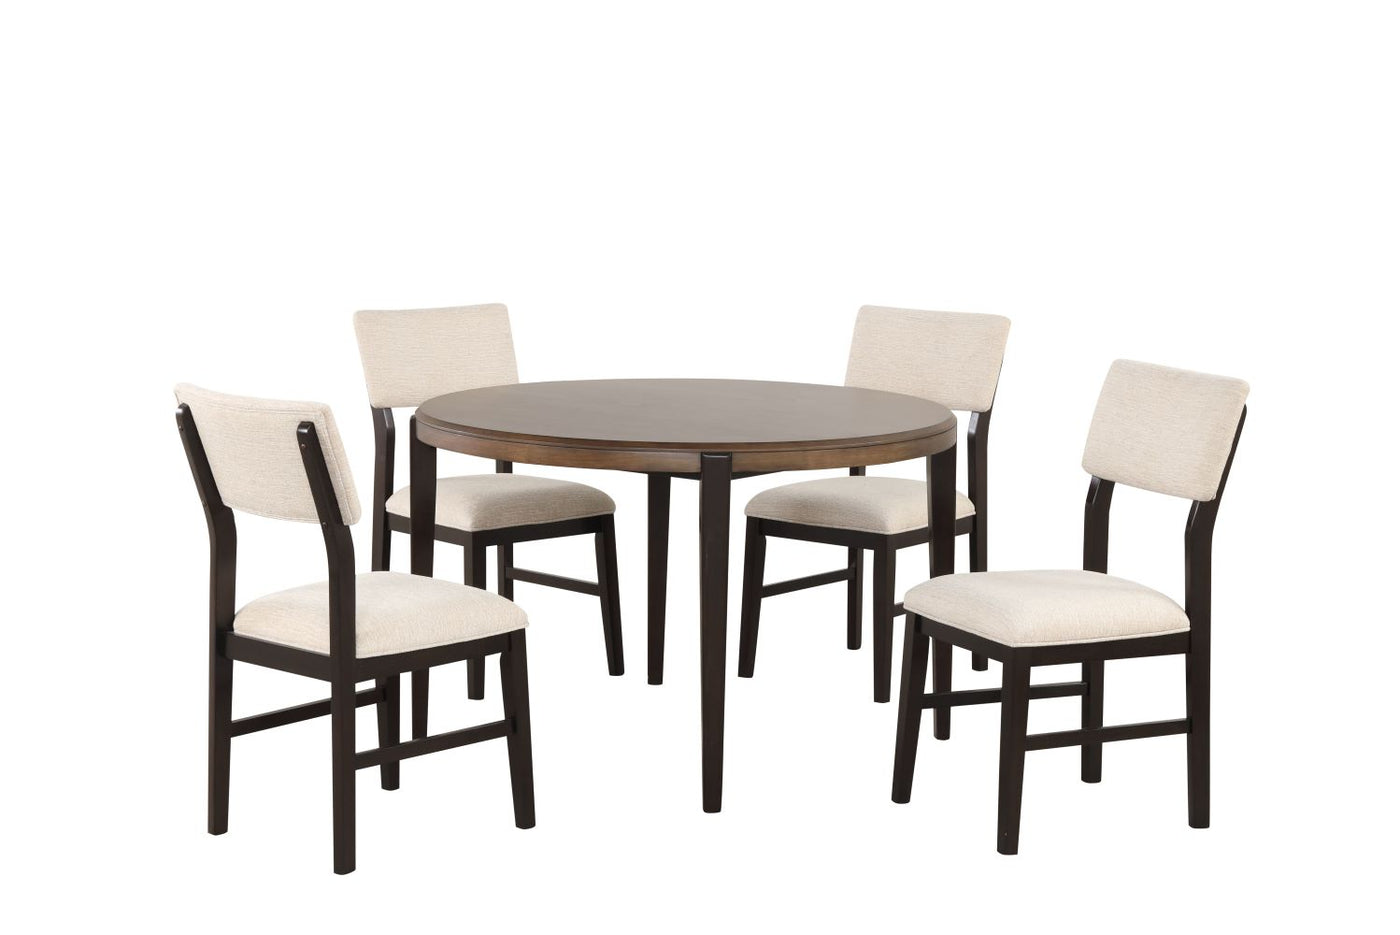 Arabella 5-Piece Round Dining Set with Upholstered Back - Black, Brown